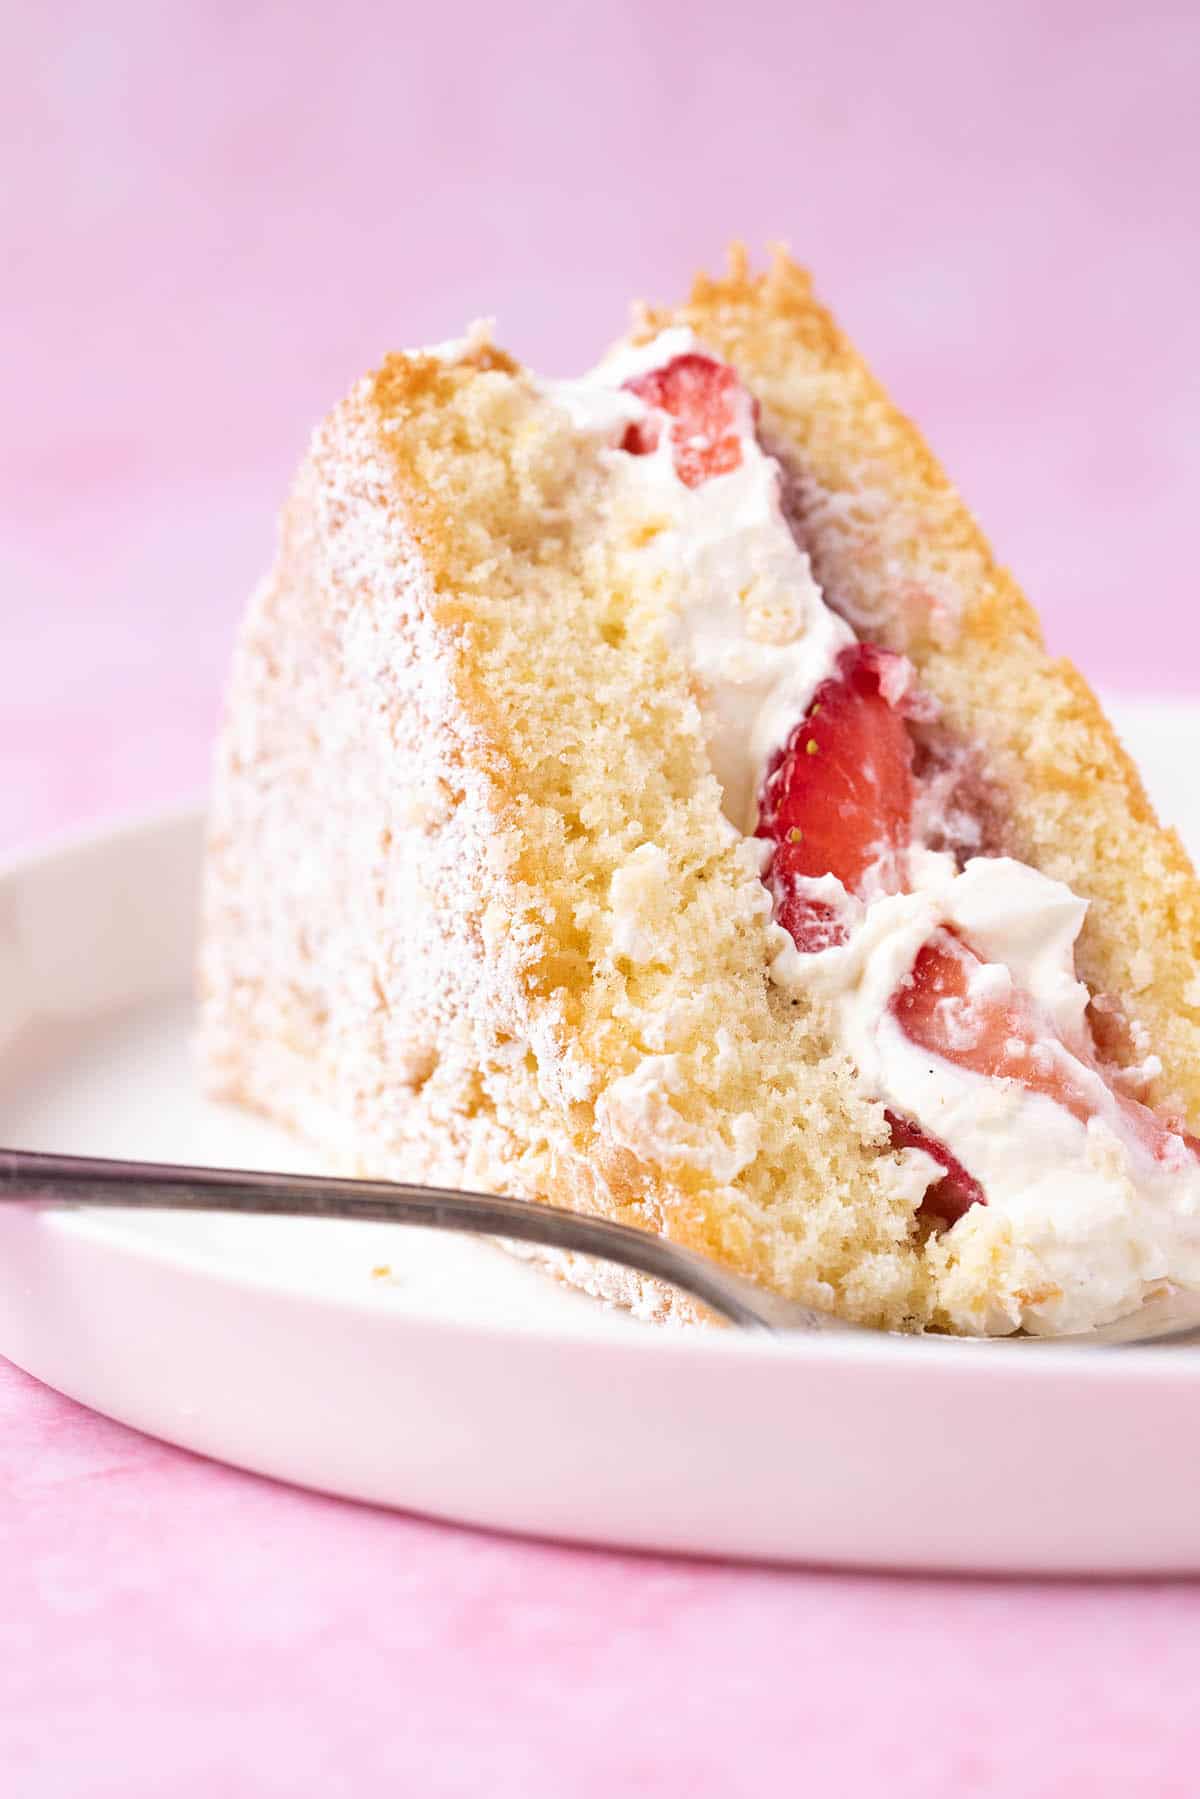 A slice of Sponge Cake filled with strawberries on a white plate with a cake fork.